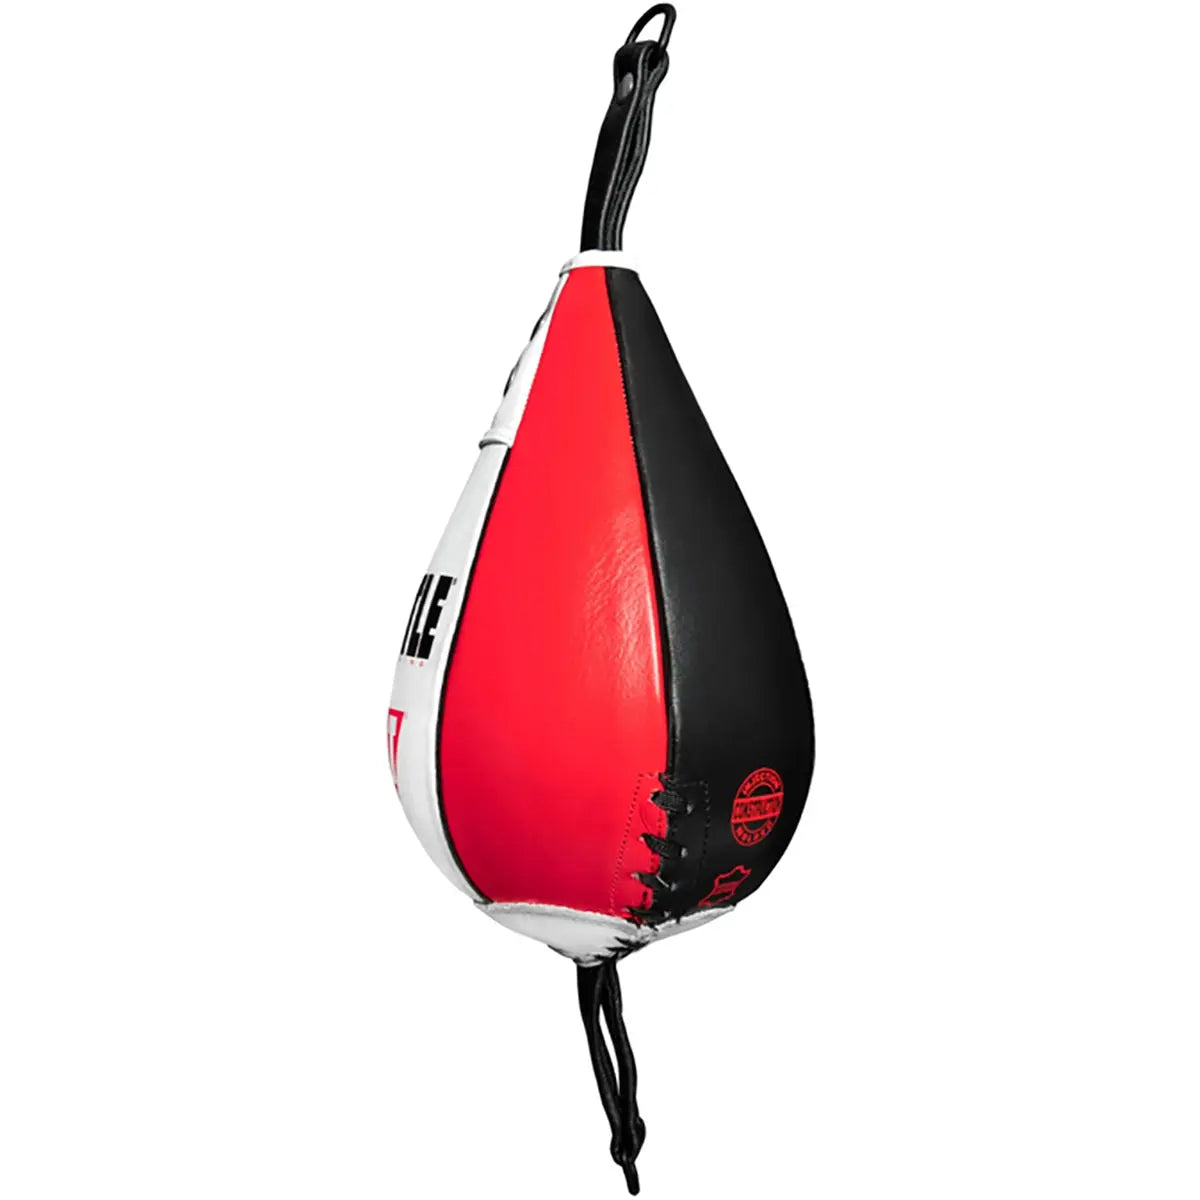 Title Boxing Mexican Style Infused Foam Double End Bag -Size 6- Black/White/Red Title Boxing